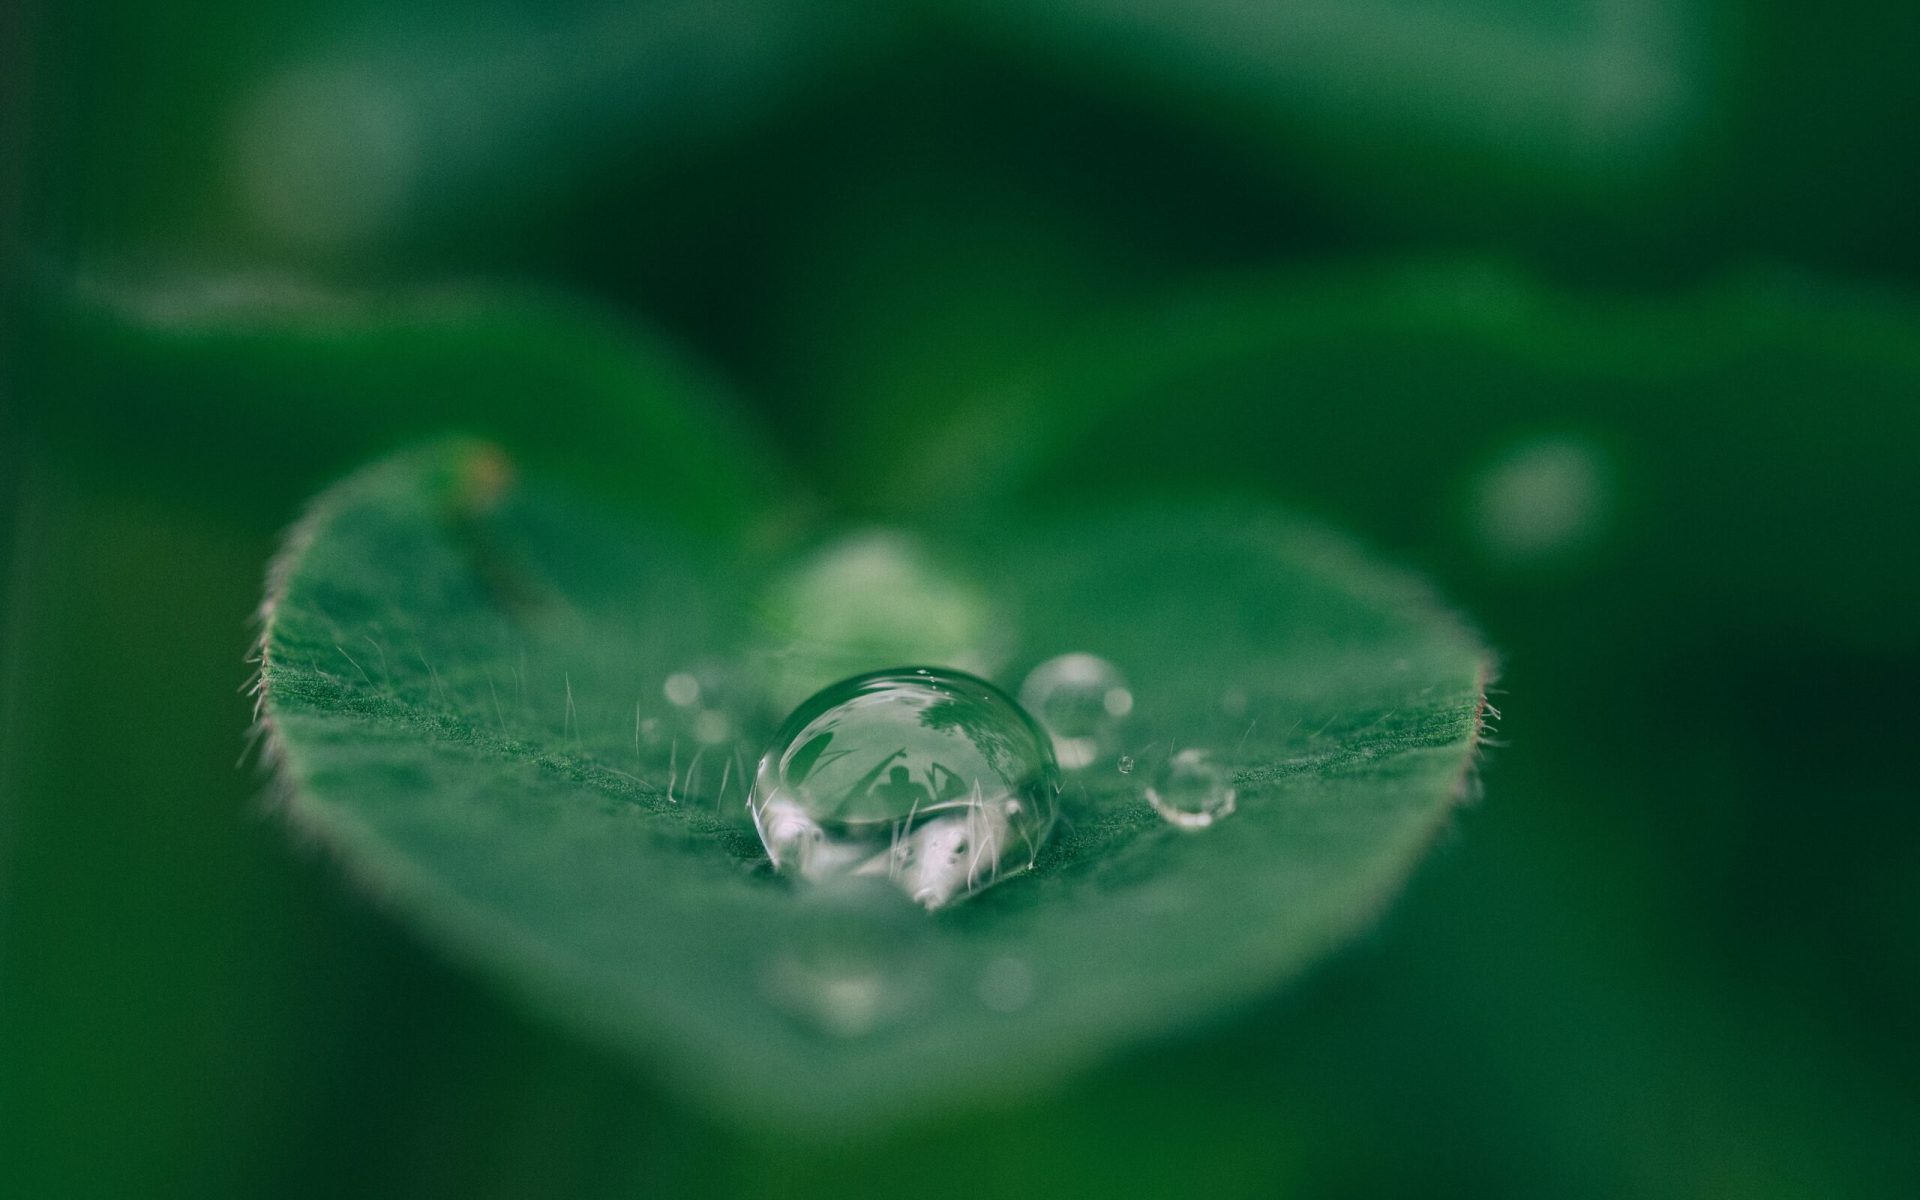 Closeup of a green leaf with a water droplet on it